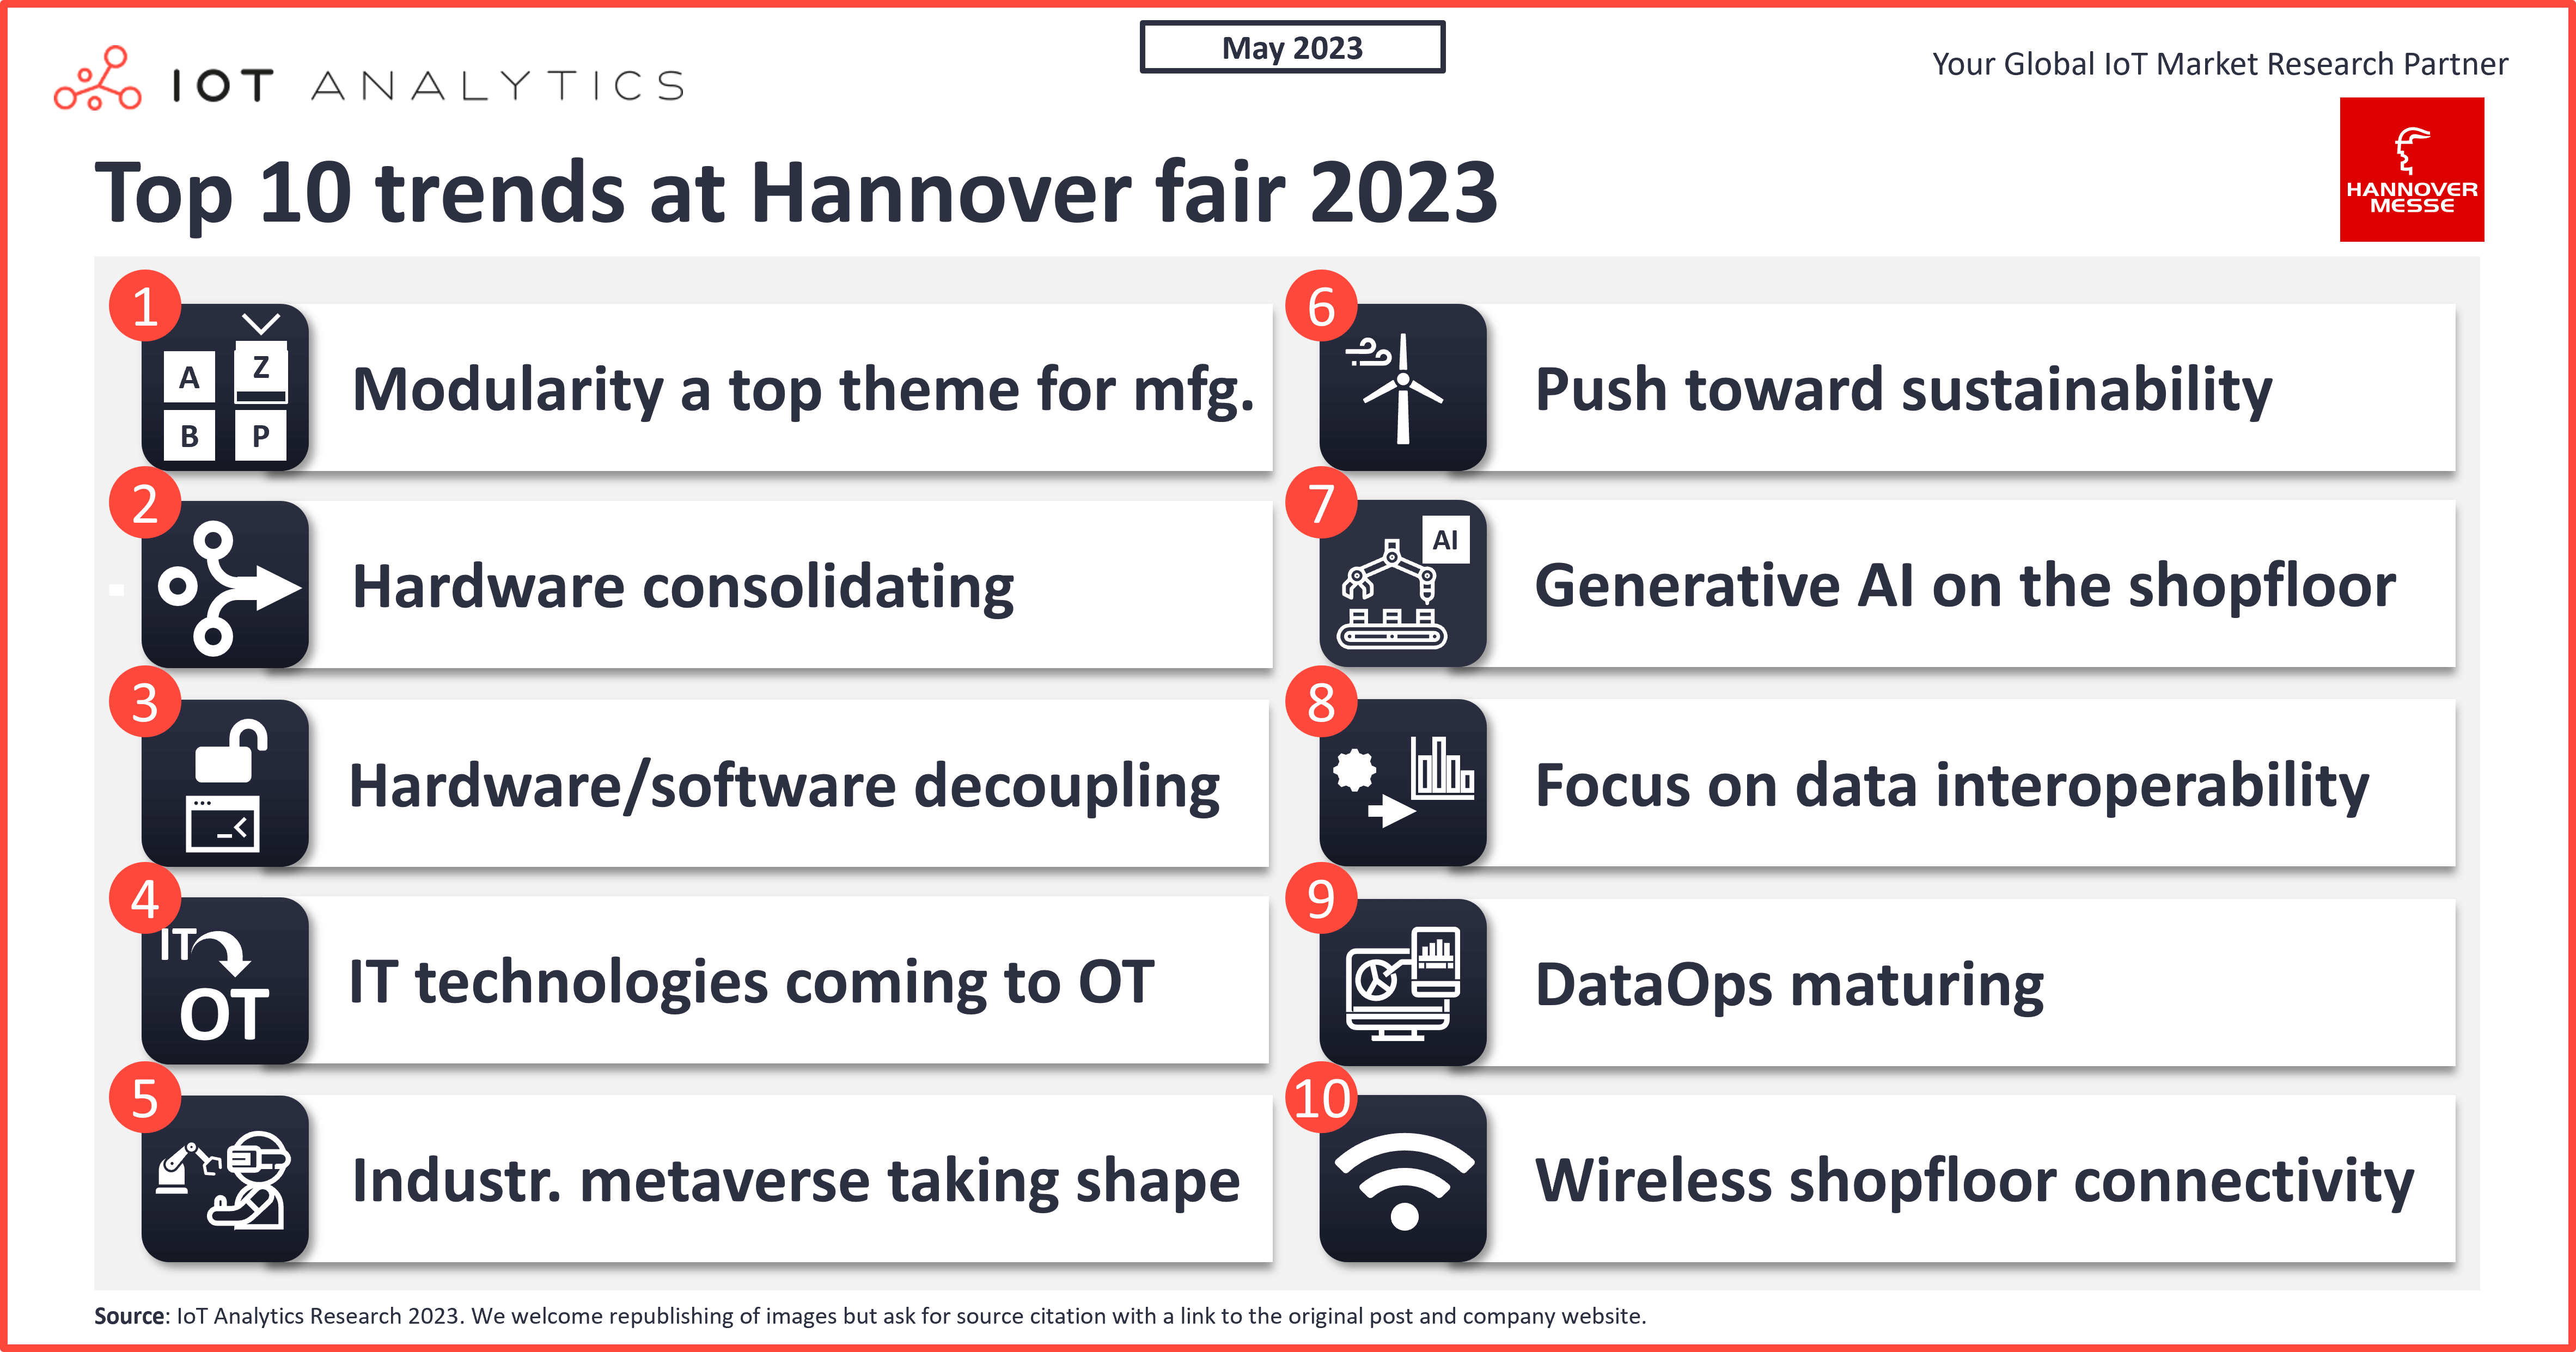 Top 10 industrial technology trends at Hannover fair 2023